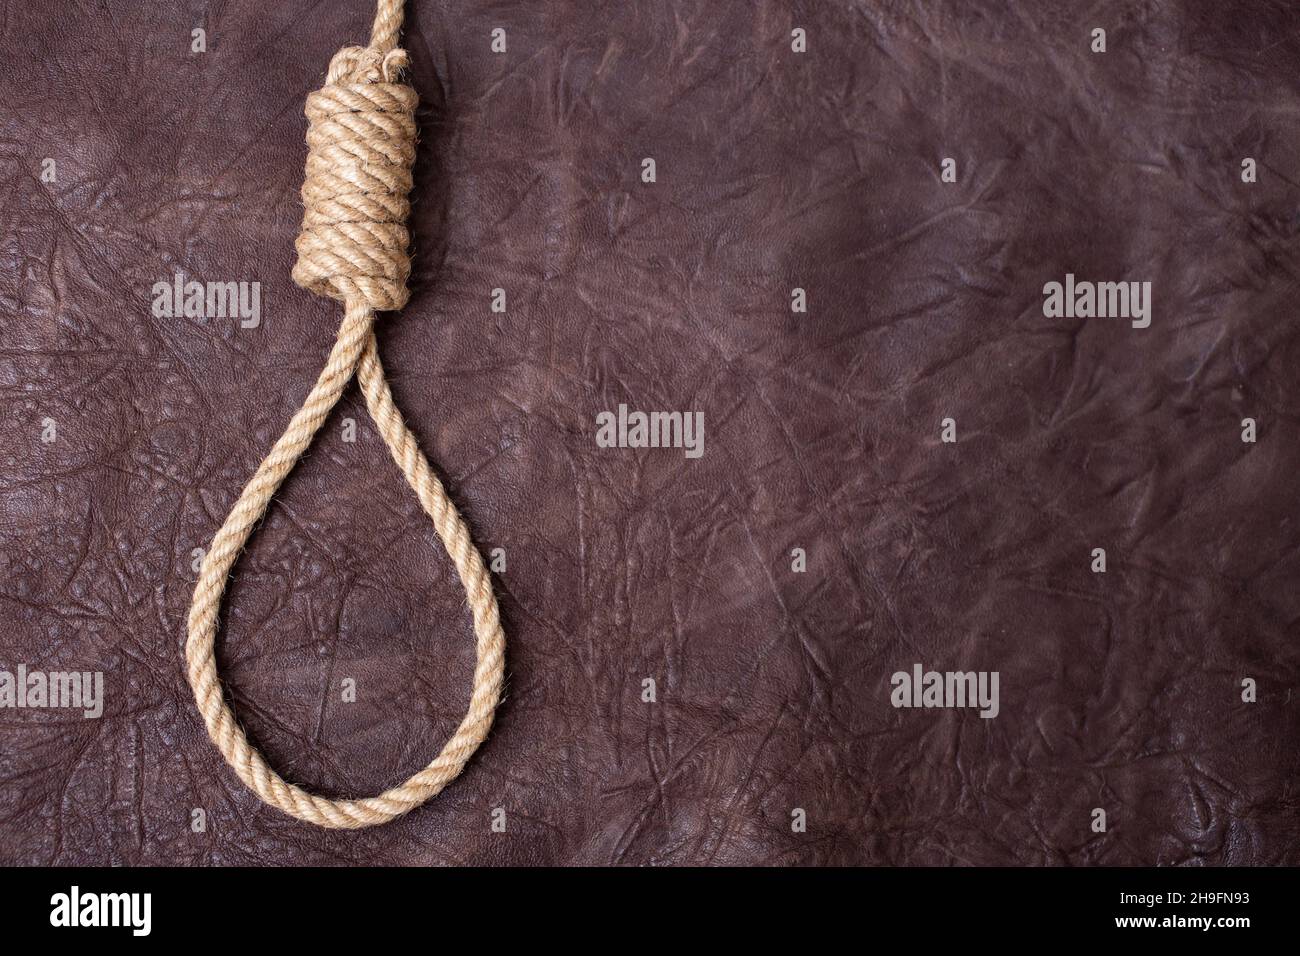 hangman's knot on brown textured leather background Stock Photo